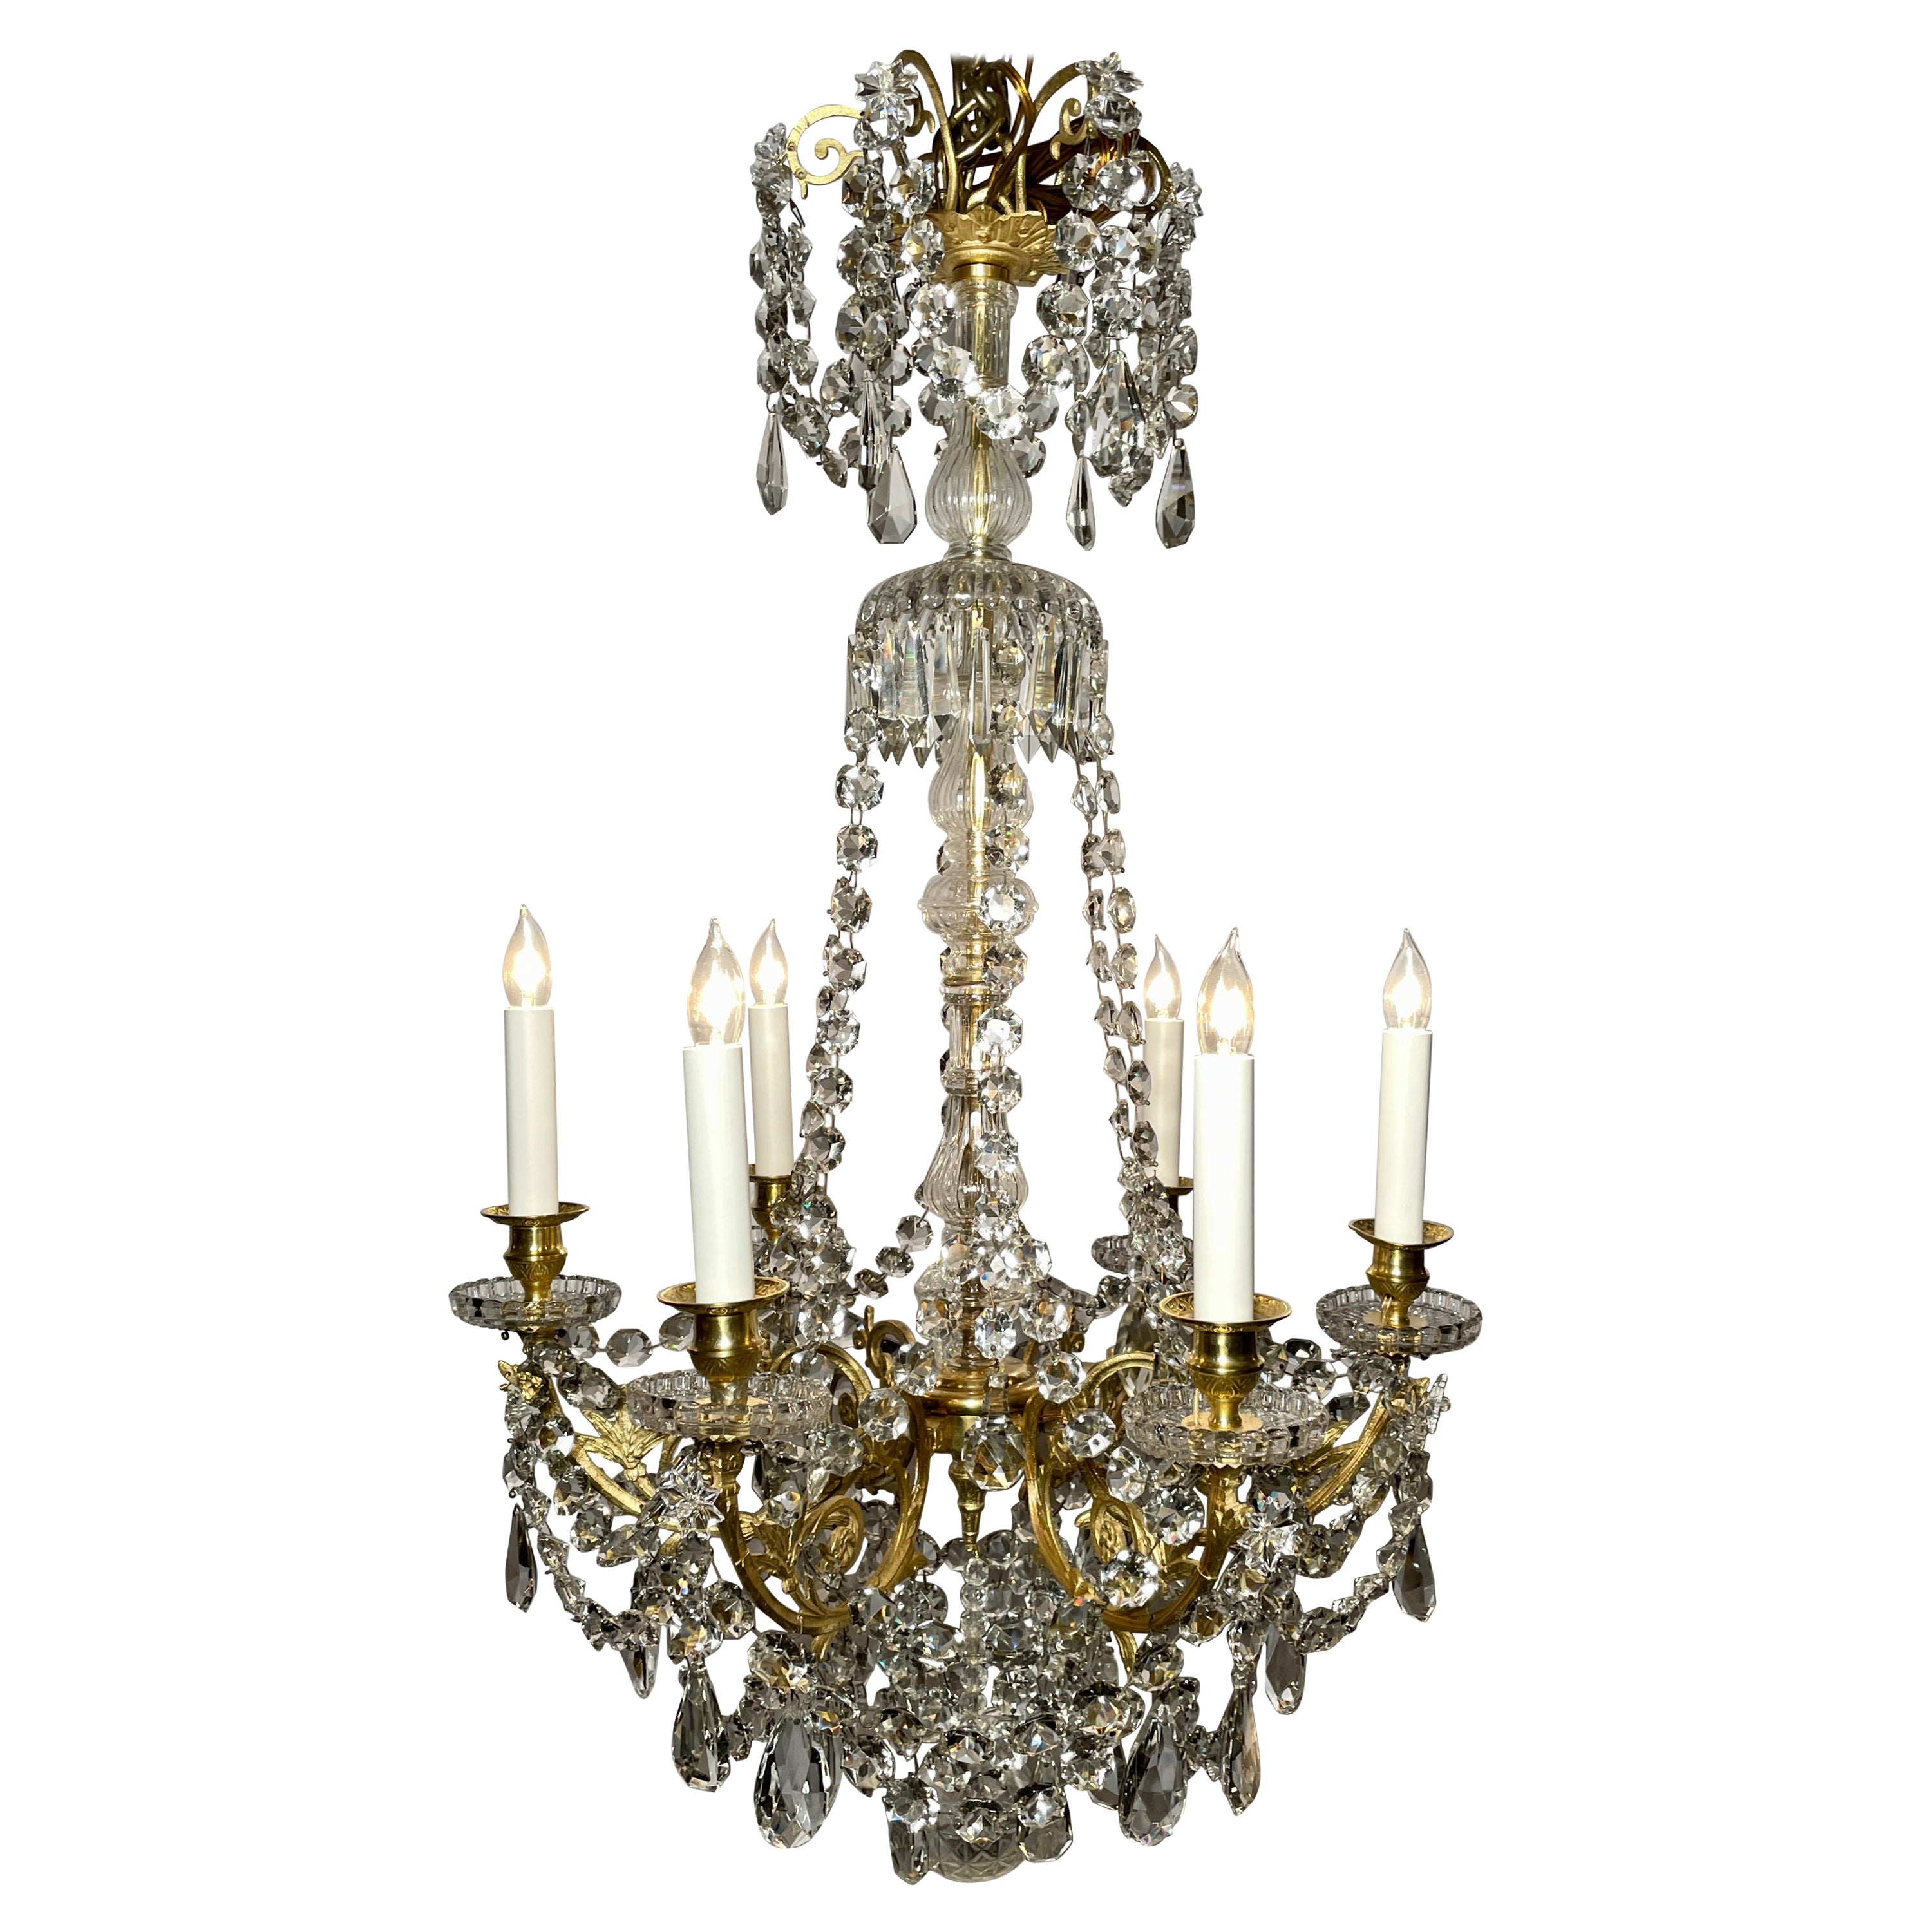 Antique 19th Century French Napoleon III Bronze D' Ore and Crystal Chandelier 